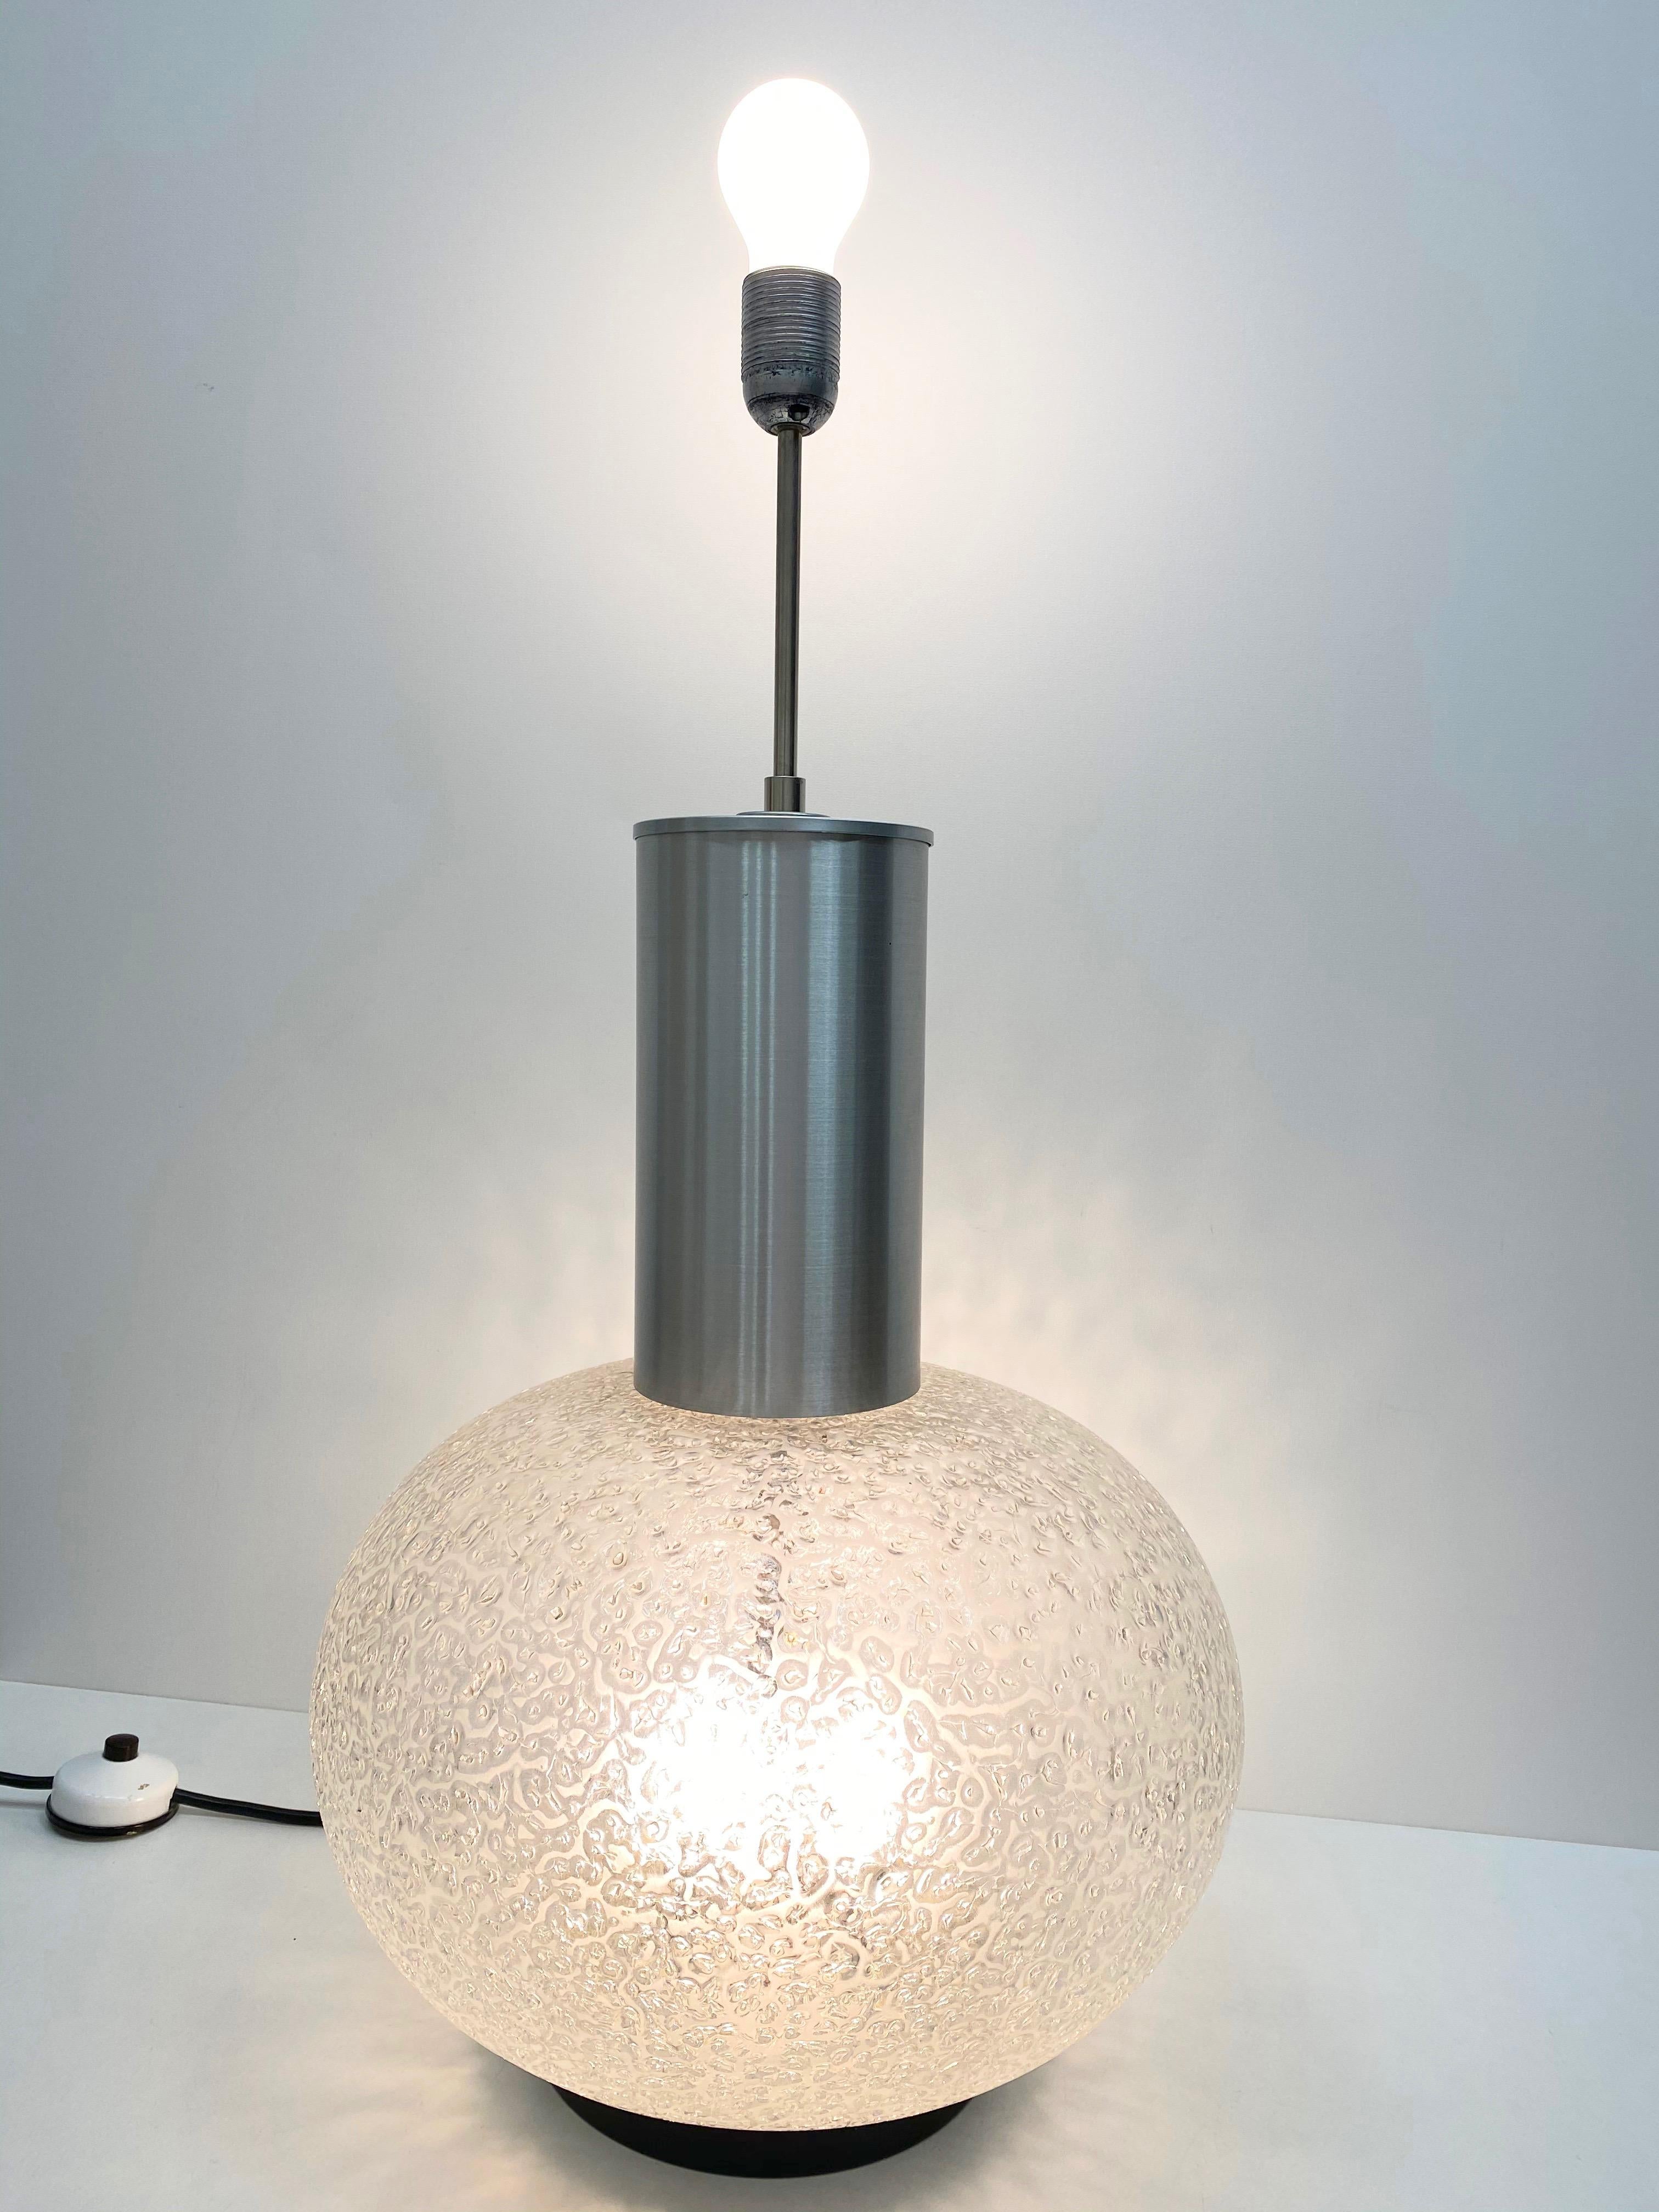 Beautiful large monumental table lamp foot or side table lamp. Made of glass and aluminum by Doria Leuchten, Germany. Glass is in Ice or Snowball design. This light requires one European E27 / 110 Volt Edison bulb, up to 60 watts on the top and 2